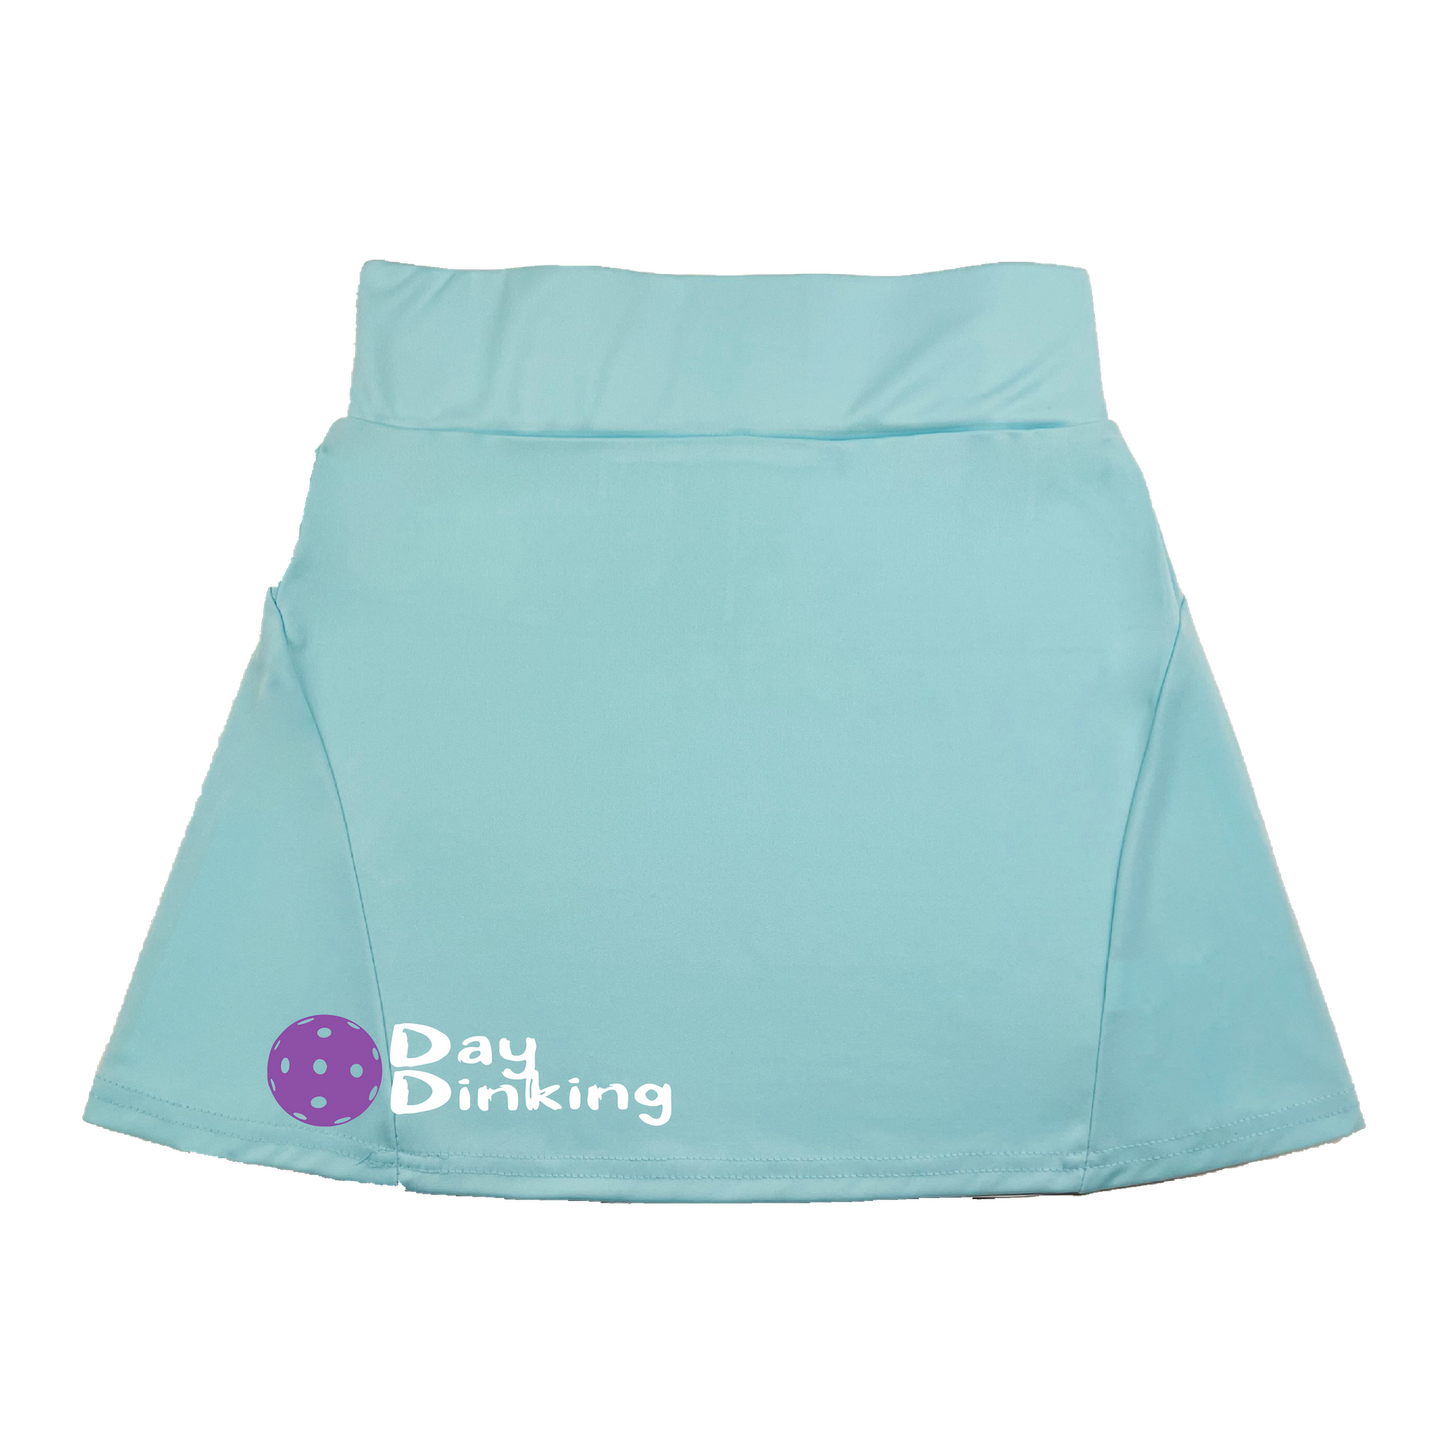 Pickleball Flirty Skort in Cyan, Purple or Rainbow.  These flirty skorts have a flat mid-rise waistband with a 3-inch waistband.  Light weight without being see through and the material wicks away moisture quickly.  Flirty pleats in the back with inner shorts for free movement and stylish coverage on the courts.  A functional zipper pocket on the back and two built in pockets on the shorts for convenient storage. The rear pleats are what make these skorts fabulous!  